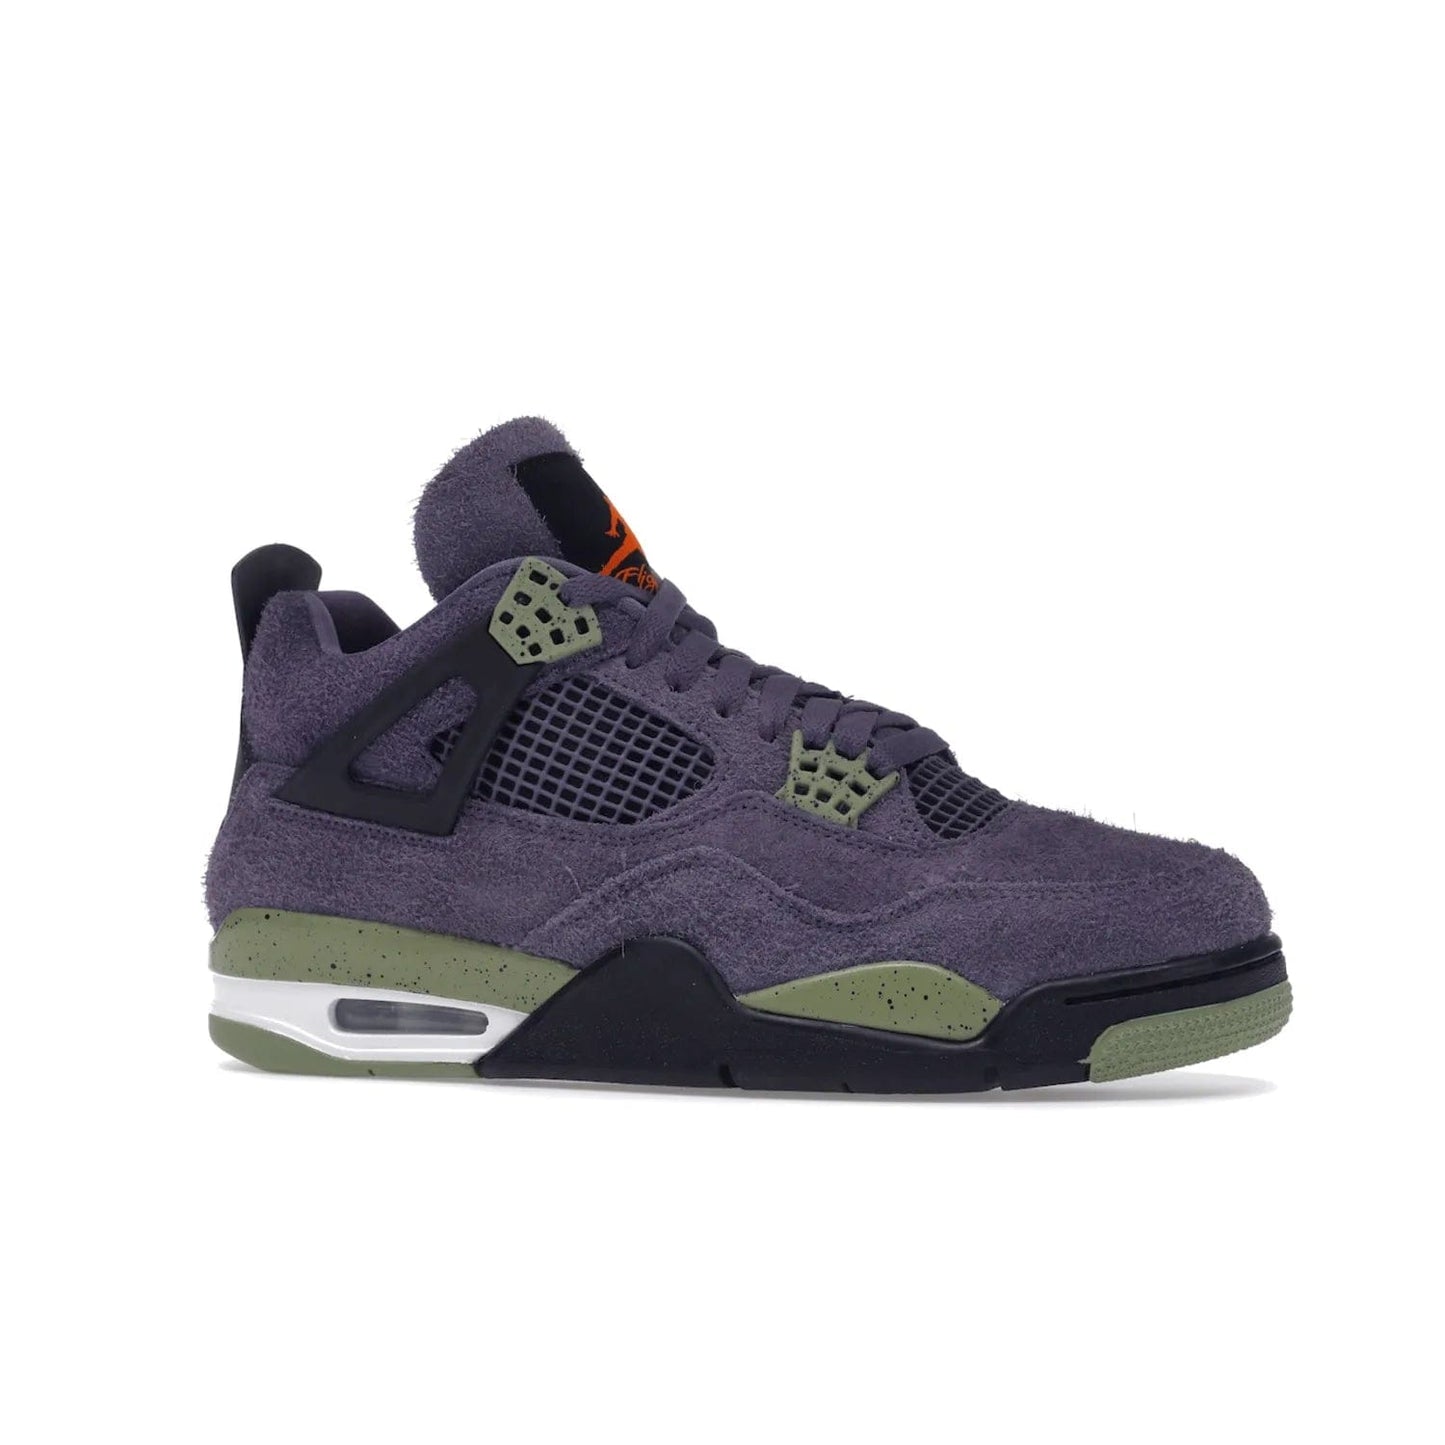 Jordan 4 Retro Canyon Purple (Women's) - Image 3 - Only at www.BallersClubKickz.com - New Air Jordan 4 Retro Canyon Purple W sneaker features shaggy purple suede, lime highlights & safety orange Jumpman branding. Classic ankle-hugging silhouette with modern colors released 15/10/2022.